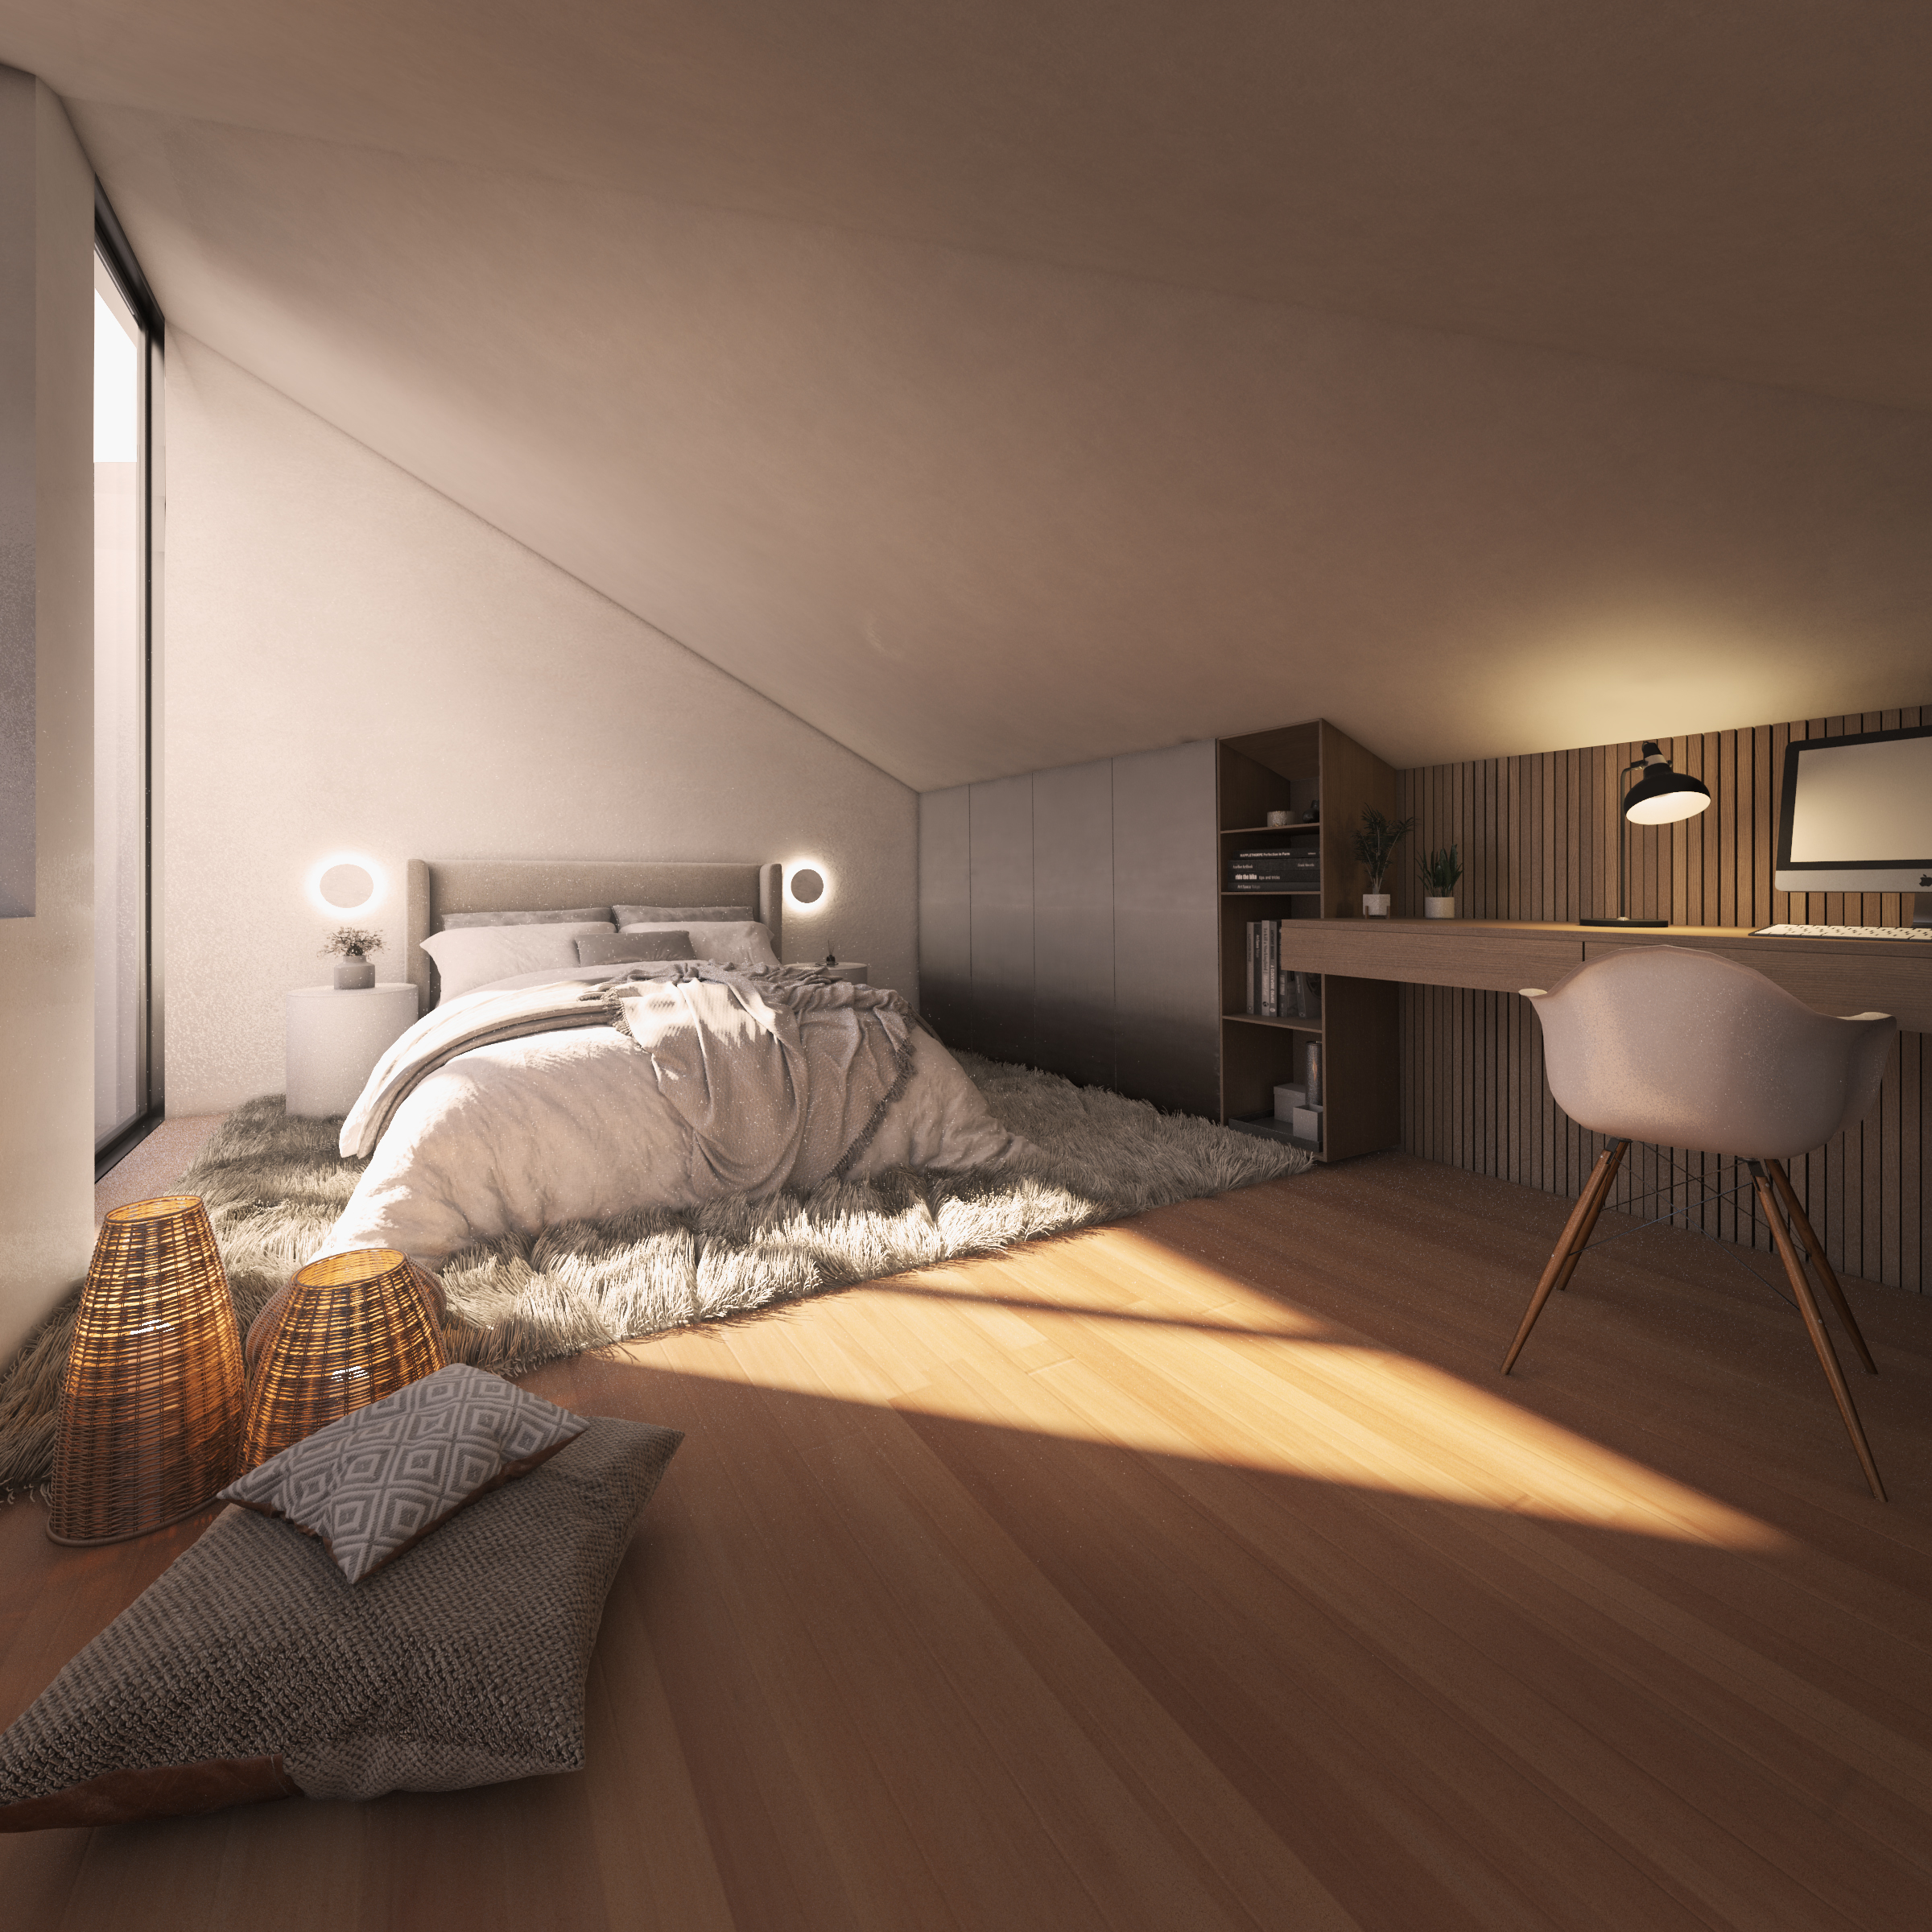 patio house bedroom render arta greece the hive architects